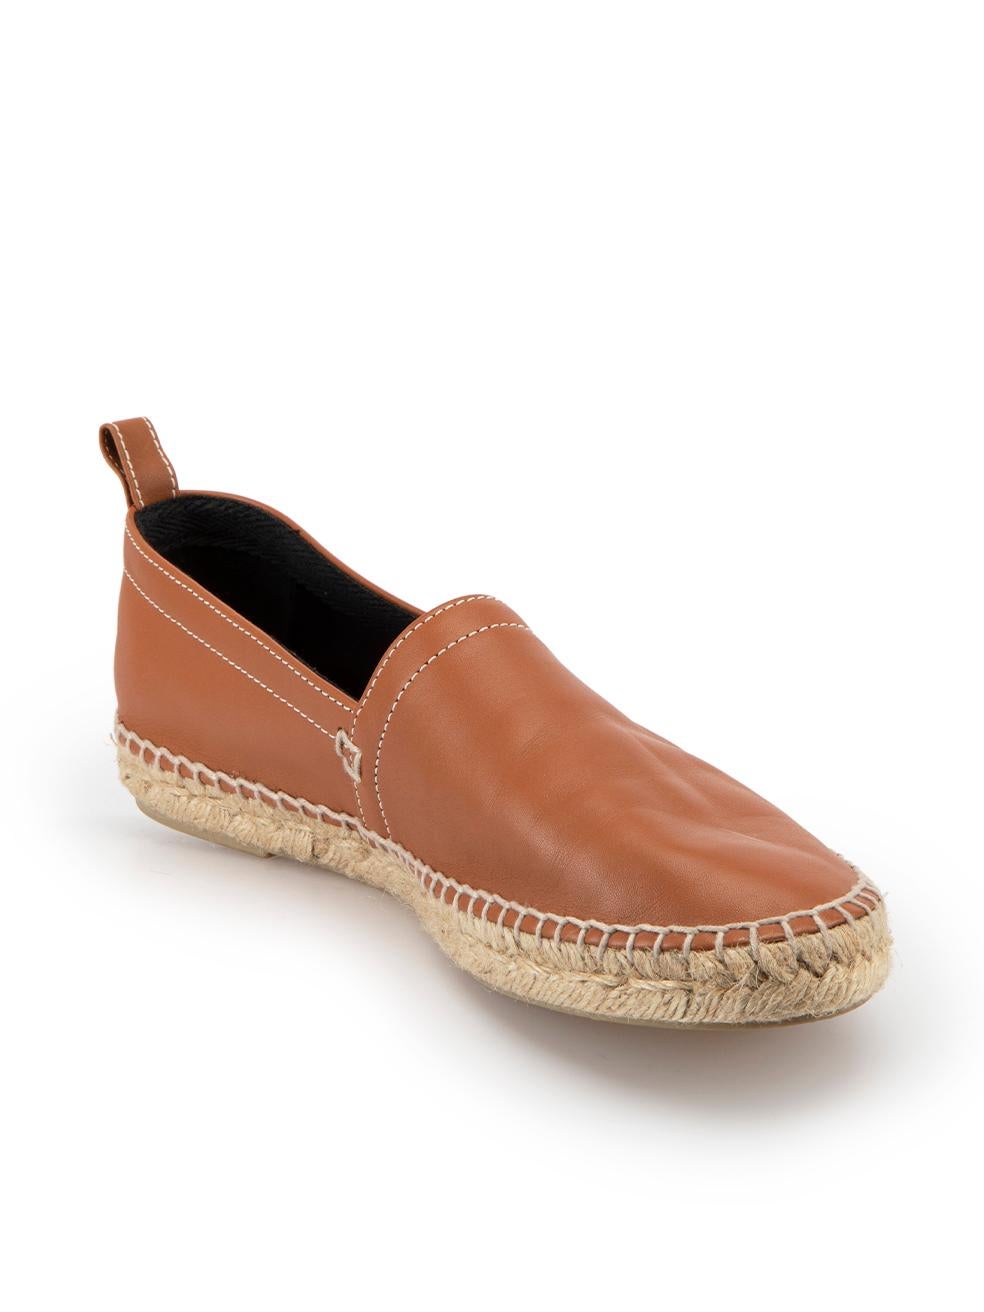 CONDITION is Very good. Minimal wear to espadrilles is evident. Minimal wear over the toe and at the heel where some creasing can be seen on this used Loewe designer resale item.



Details


Brown

Leather

Slip-on espadrilles

Round toe

Blanket